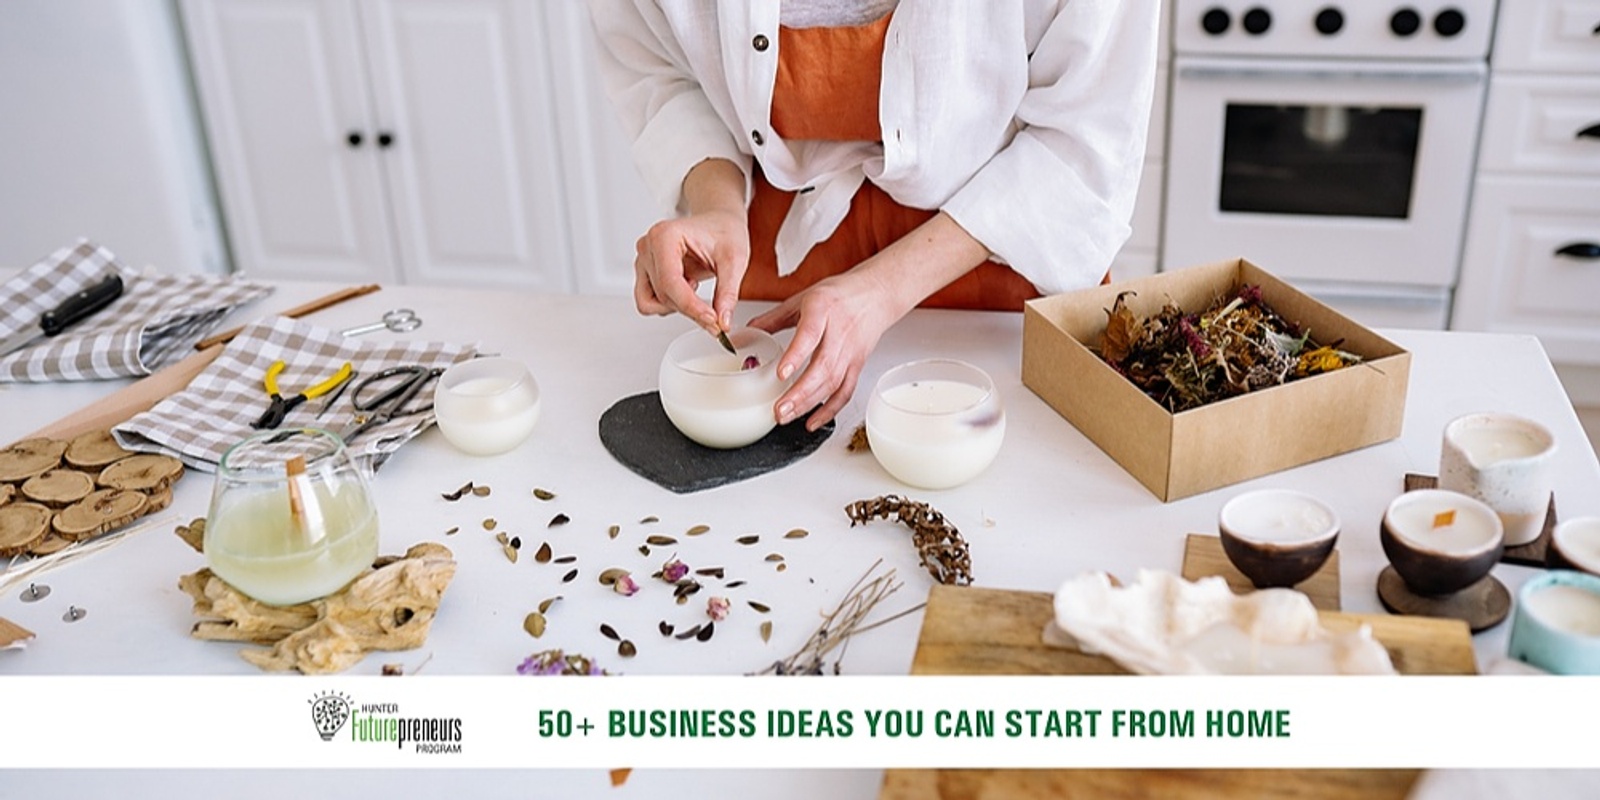 50+ Small Business Ideas You Can Start from Home